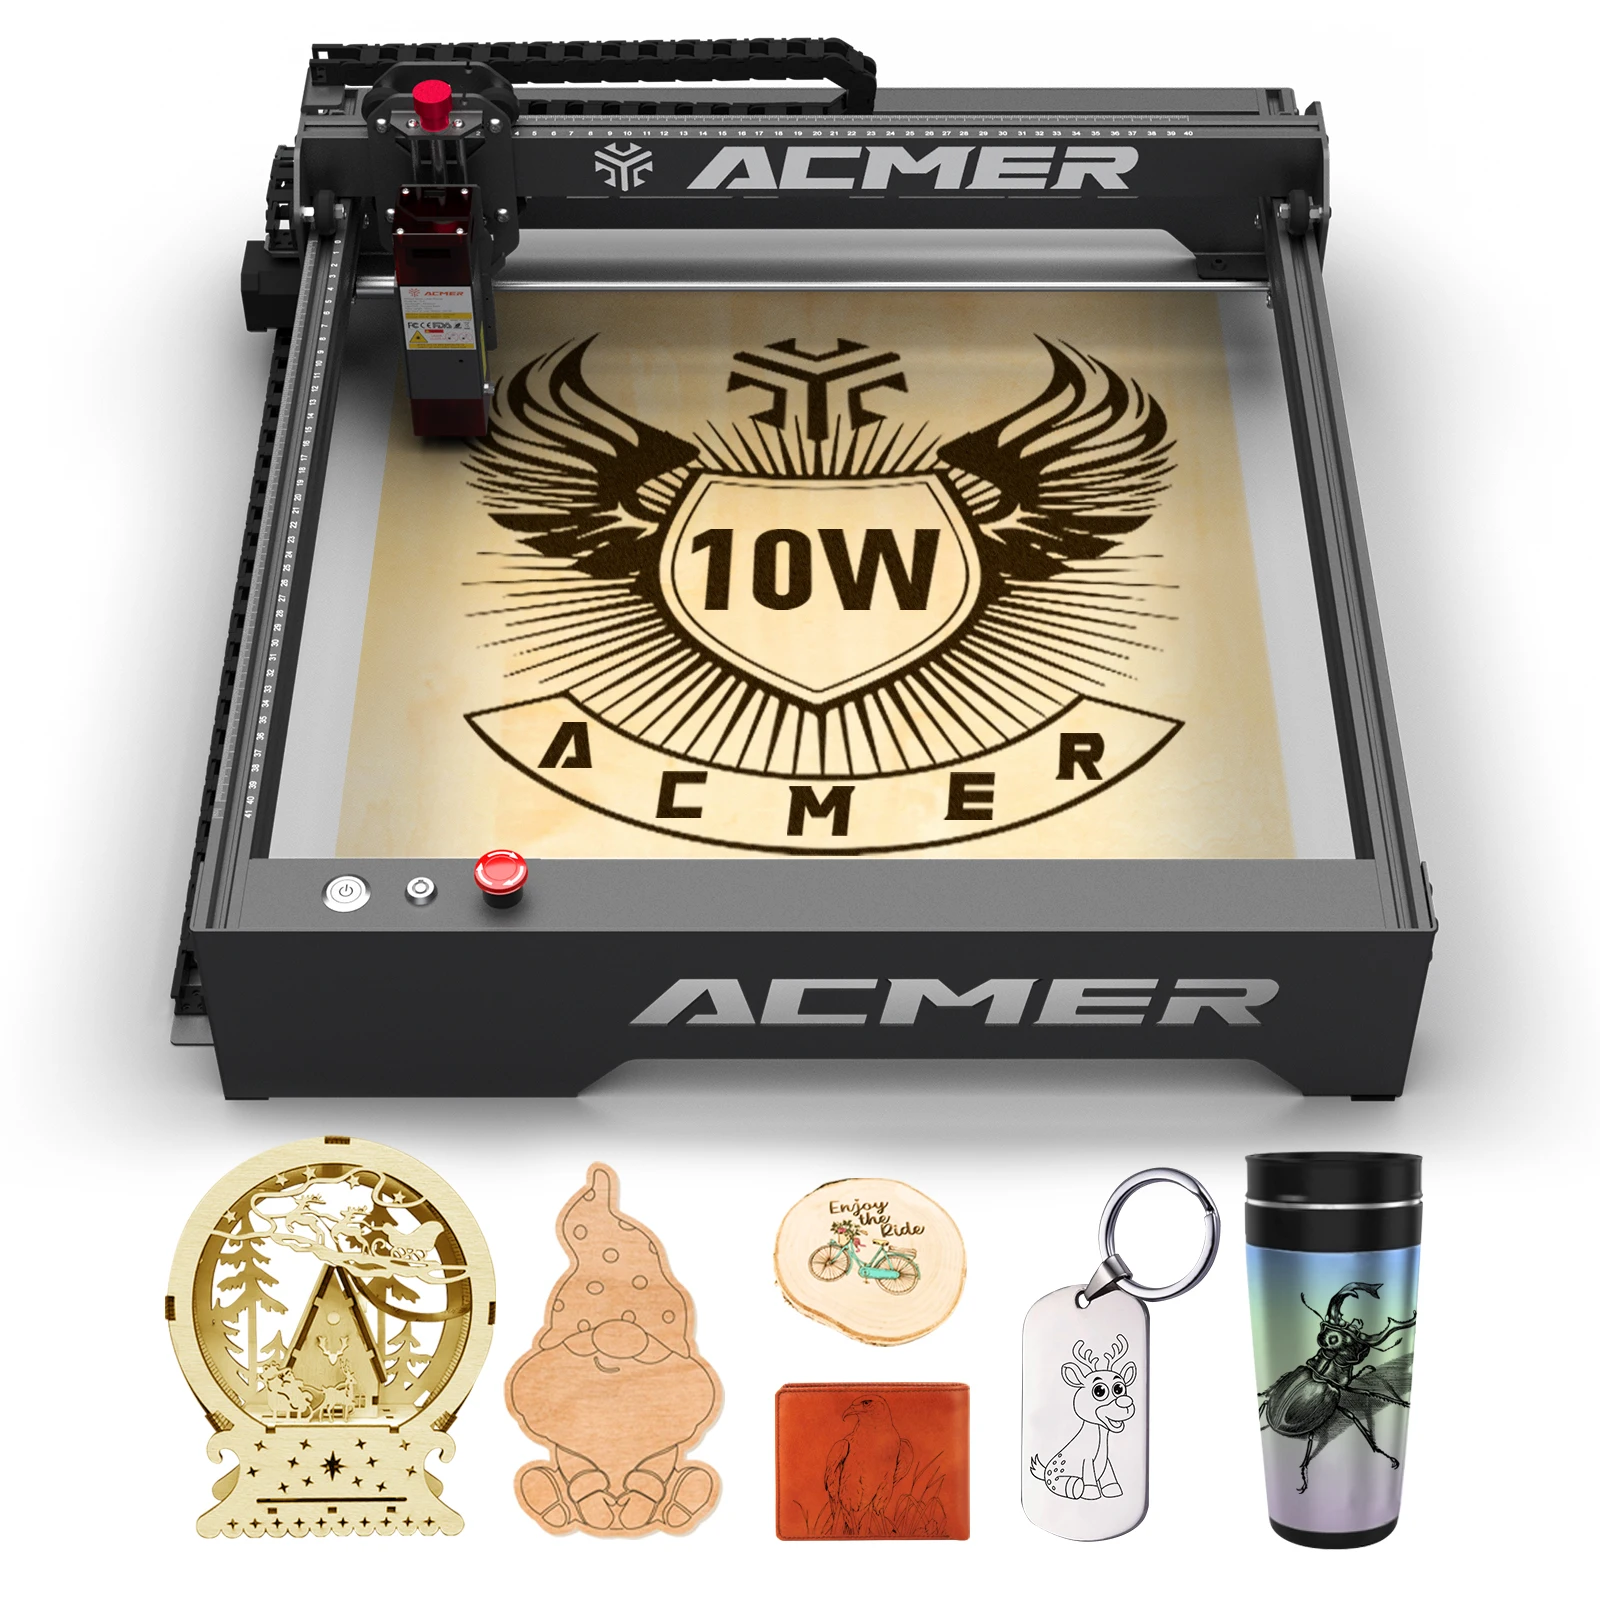 

ACMER P1 10W Powerful Laser Engraver Machine With Wifi Control Laser Engraving Cutting Machine for Wood and Metal 400X410mm Size